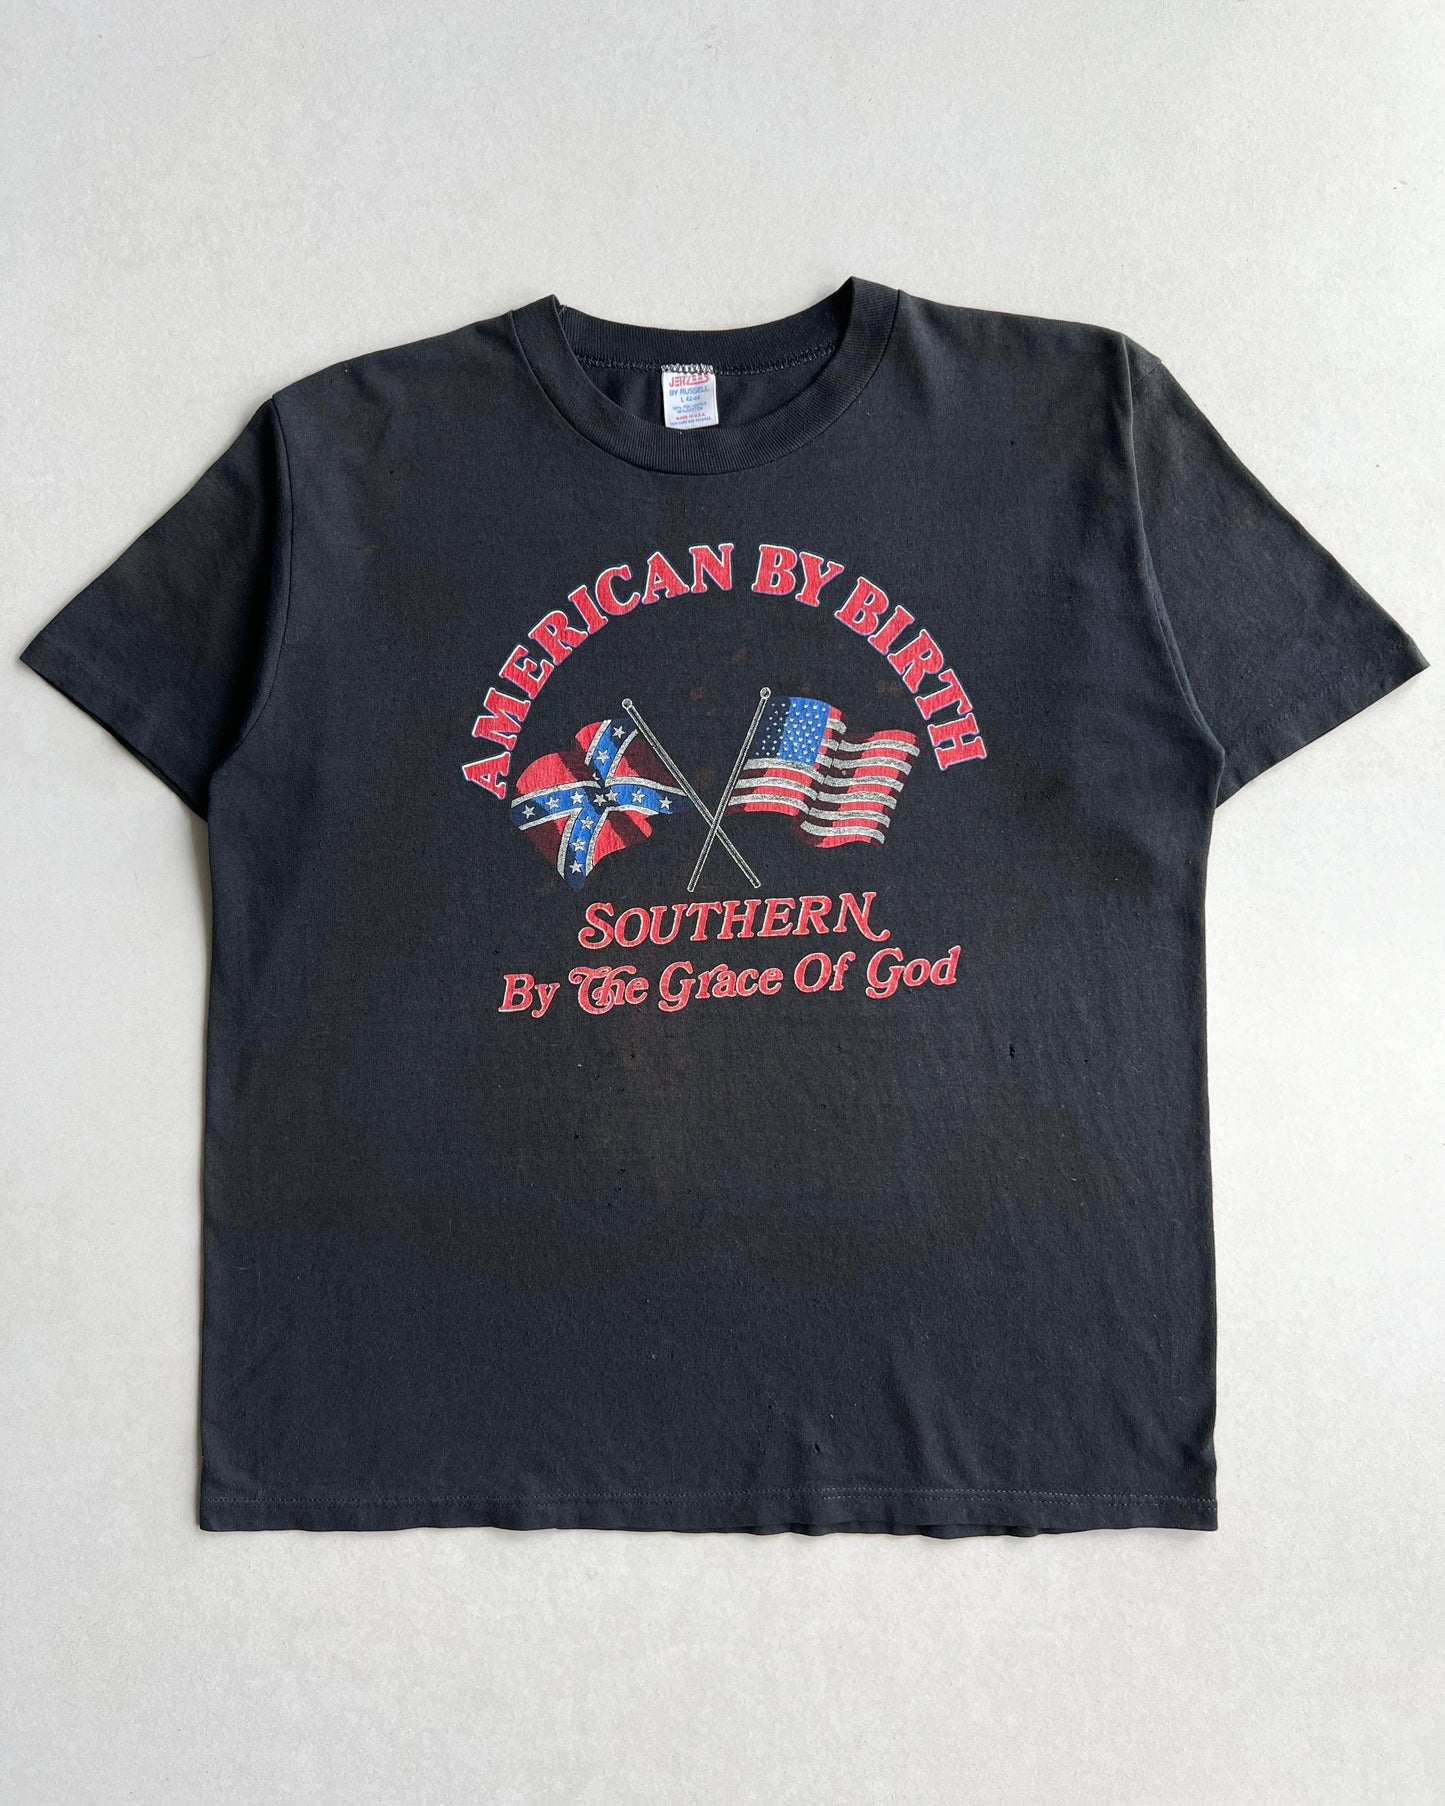 1980S 'AMERICAN BY BIRTH, SOUTHERN BY THE GRACE OF GOD' TEE (L)